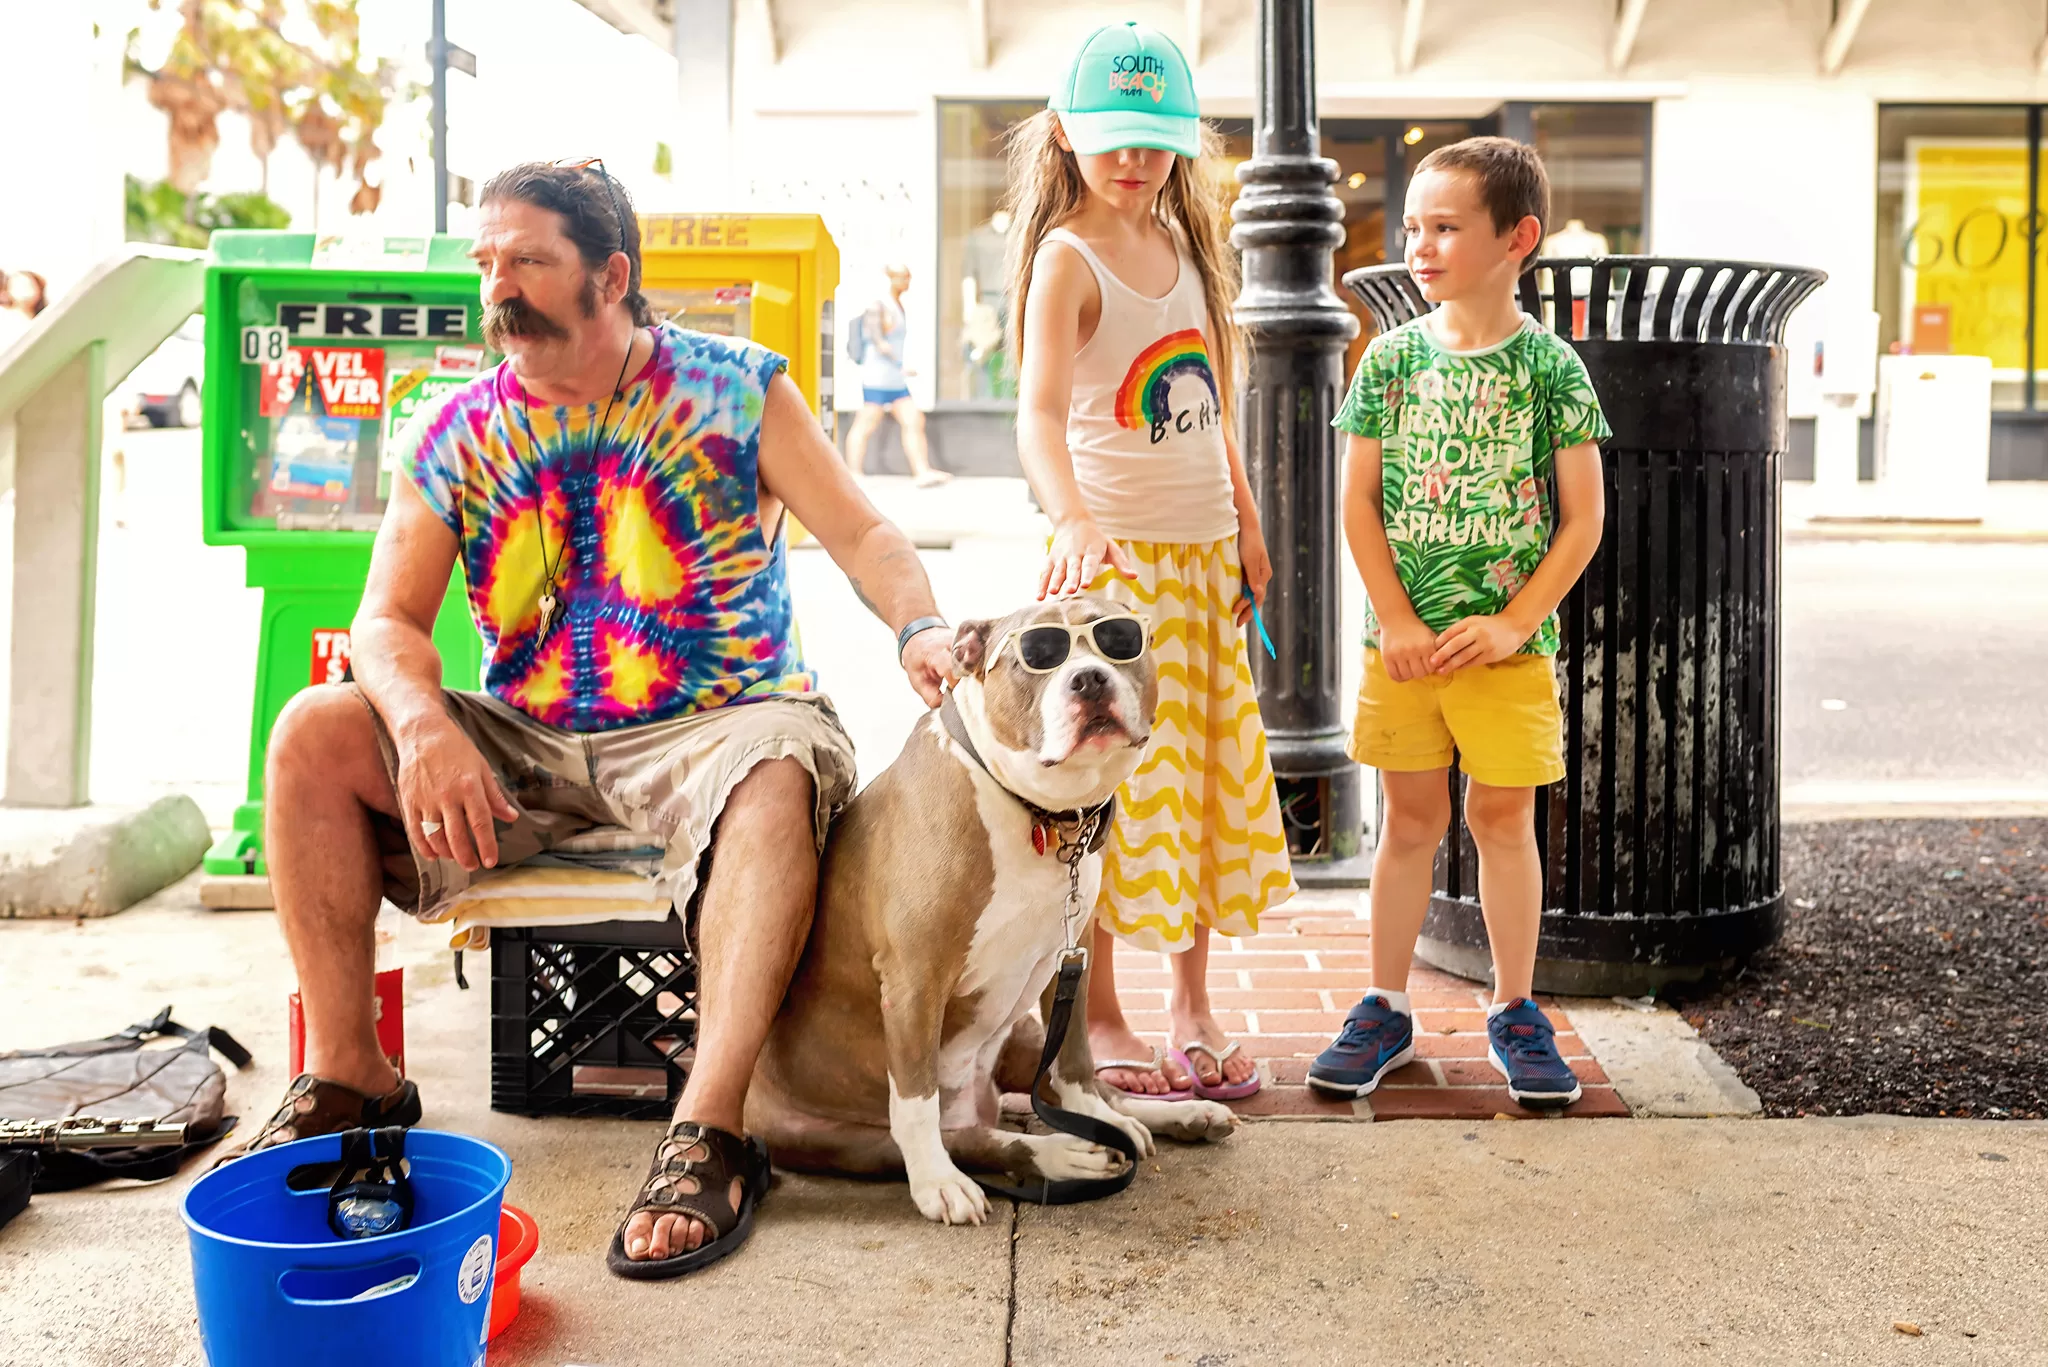 For Families To Do In Key West